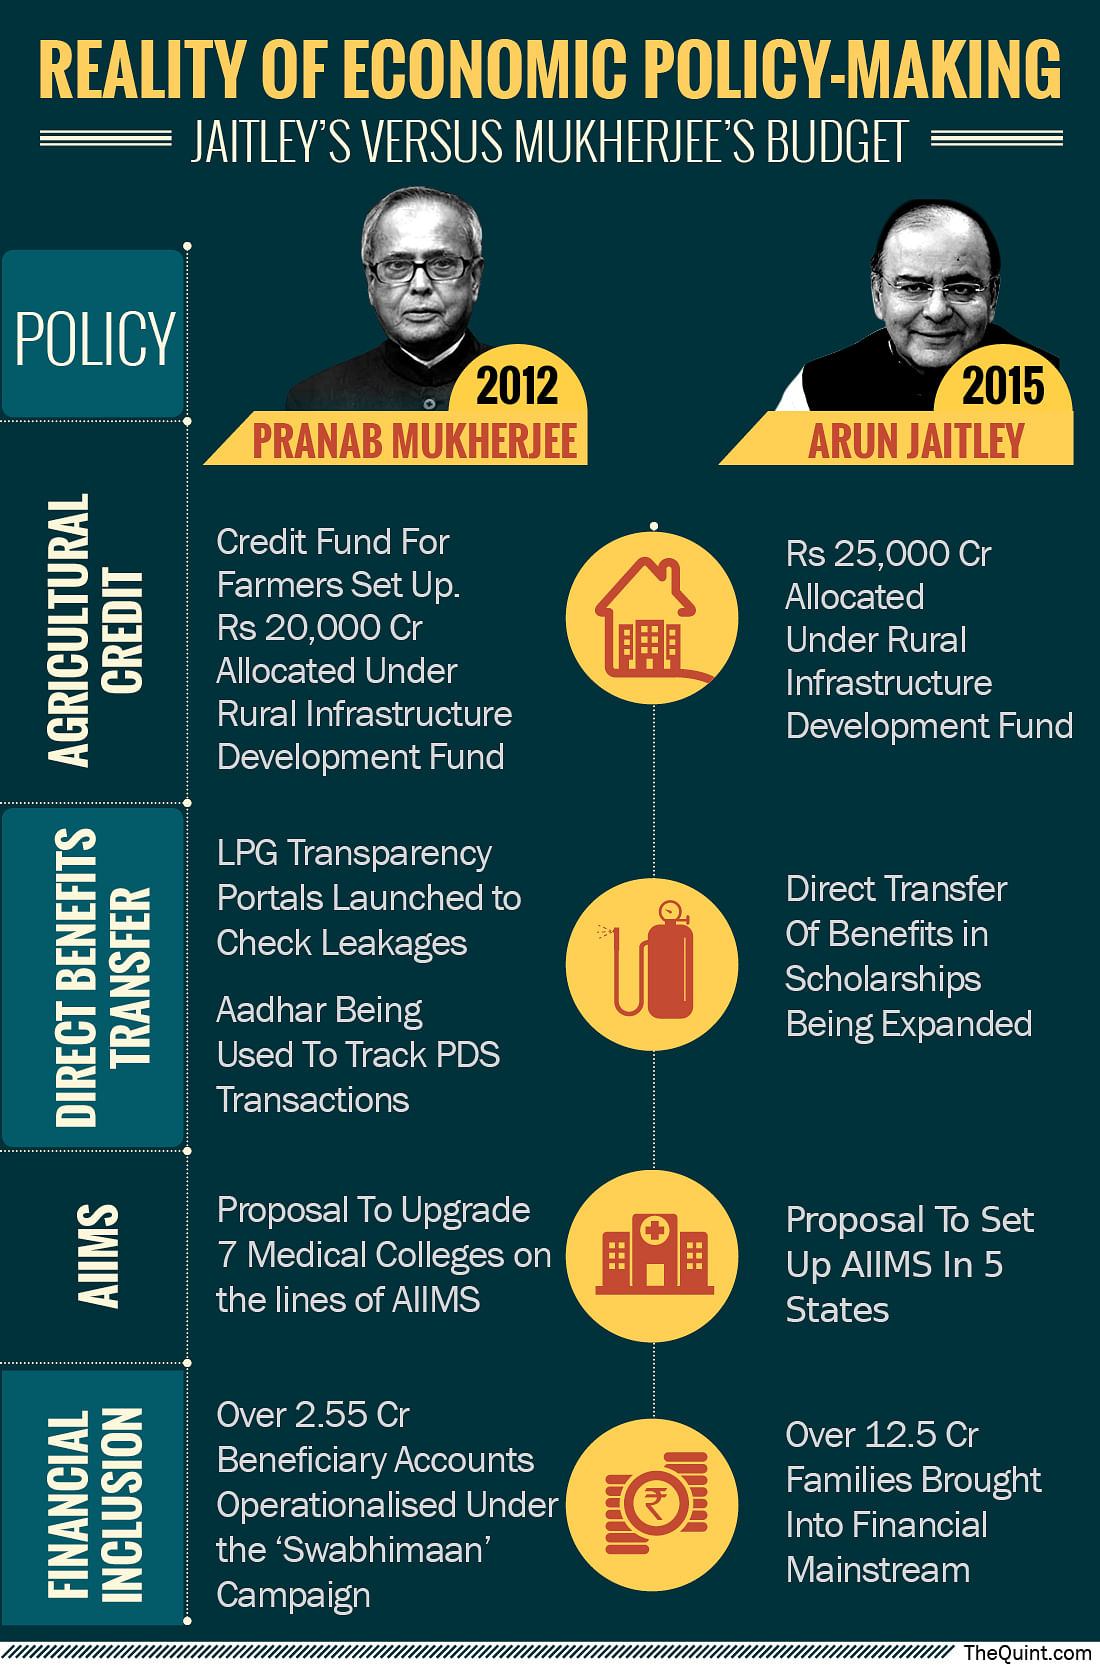 Building on what UPA had initiated has been the USP of Jaitley’s previous budget, will it be any different this time?